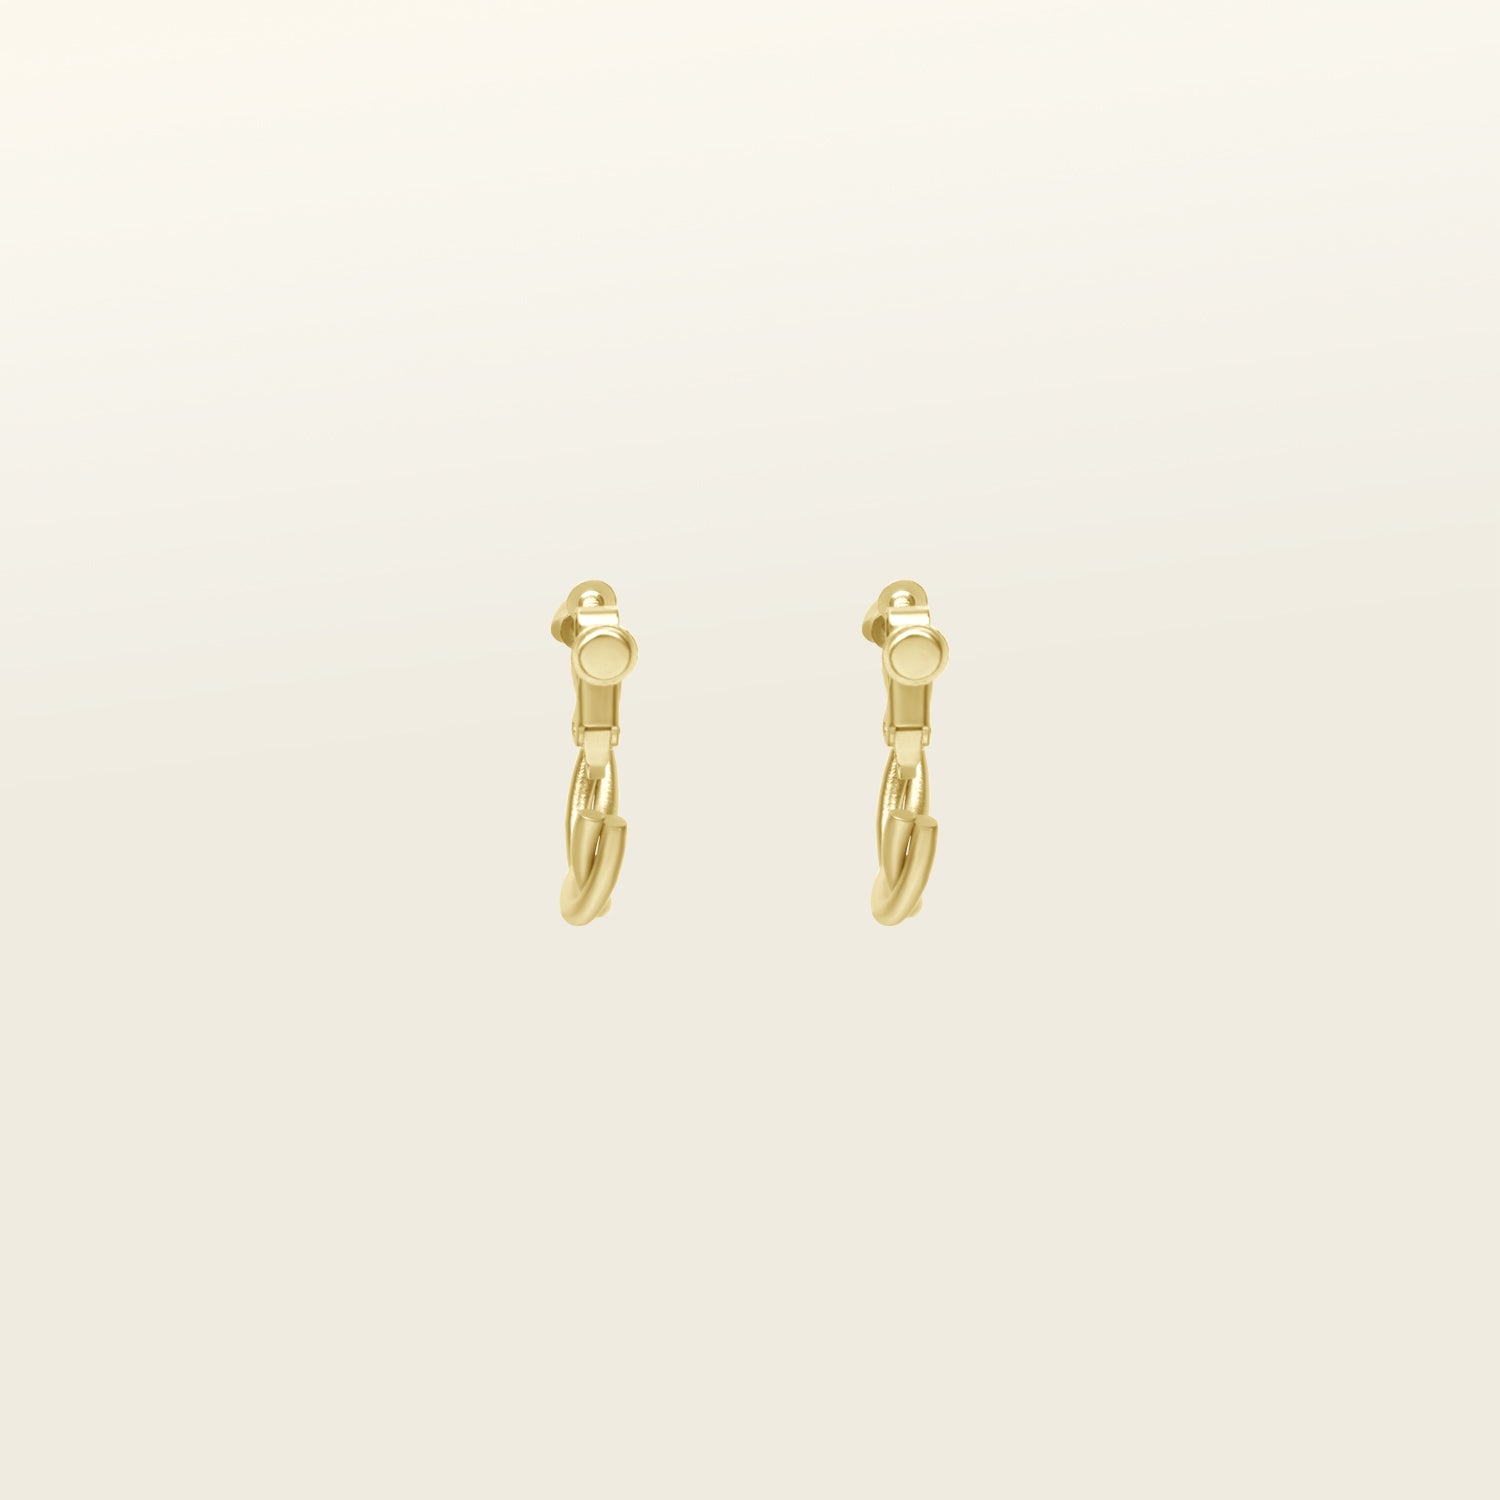 Image of the Twist Hoop Earrings feature a secure and comfortable screwback clip-on closure ideal for all ear types. Wear these earrings for up to 8-12 hours per day with a secure hold and the ability to be manually adjusted to the individual's size. Crafted from gold tone plated copper alloy, these earrings come is a single pair.